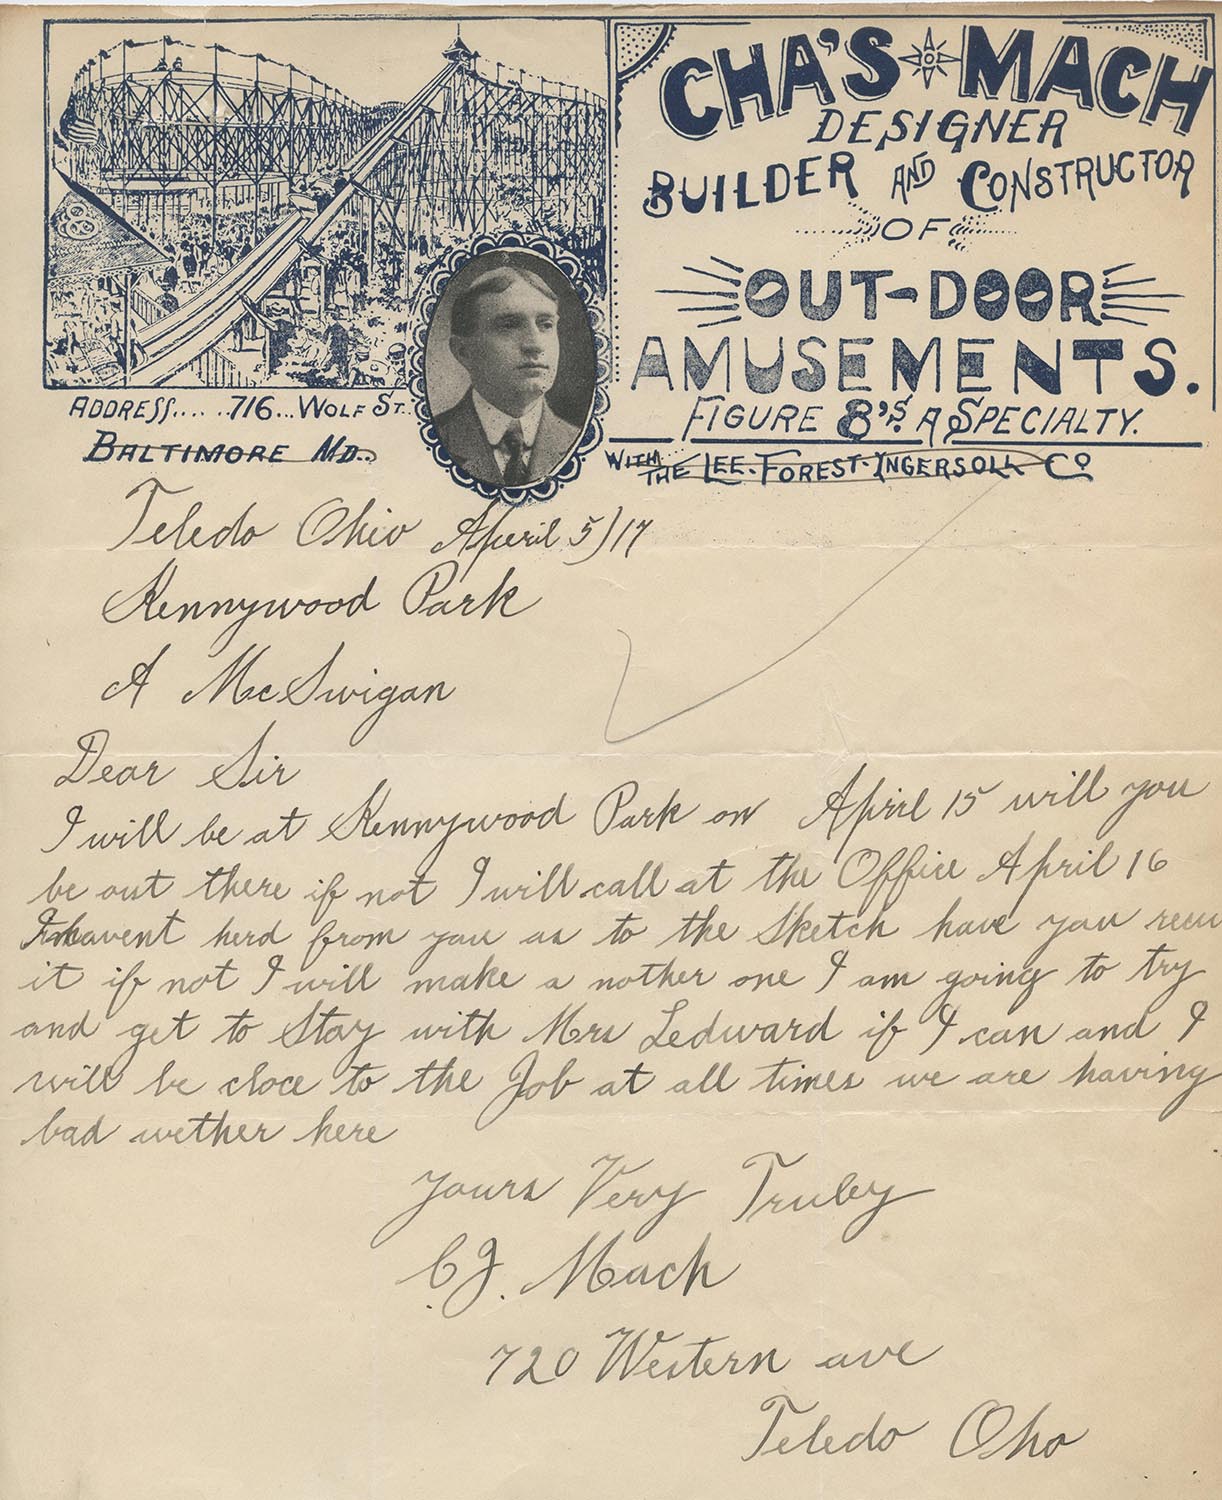 Letter from Charles Mach to Andrew McSwigan, April 5, 1917.